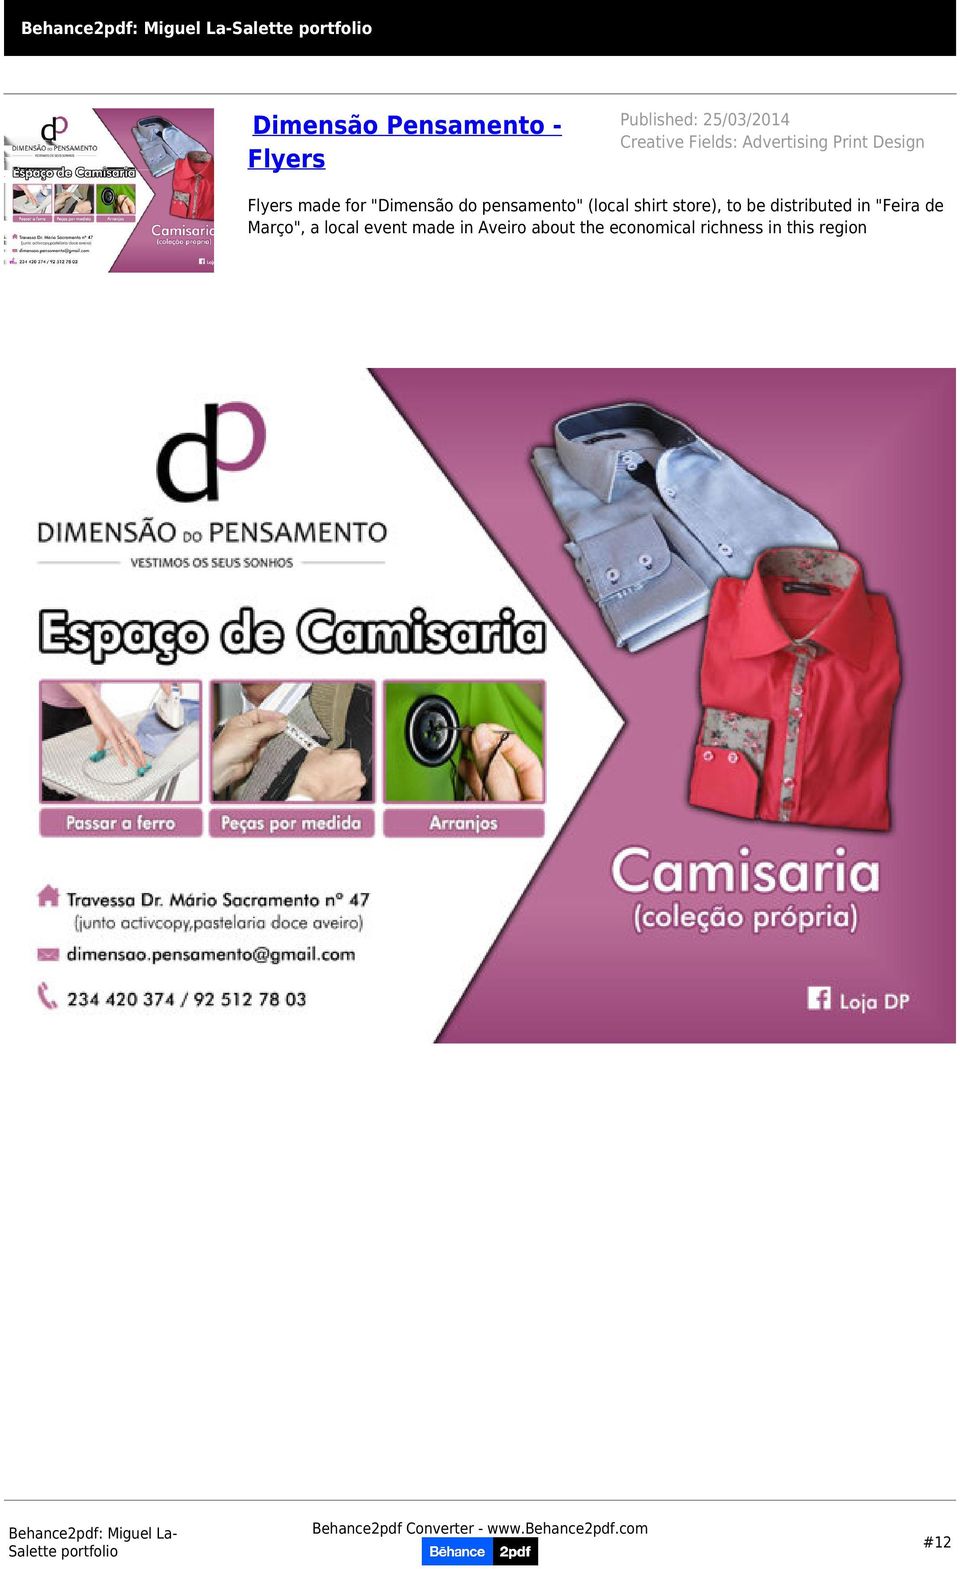 (local shirt store), to be distributed in "Feira de Março", a local